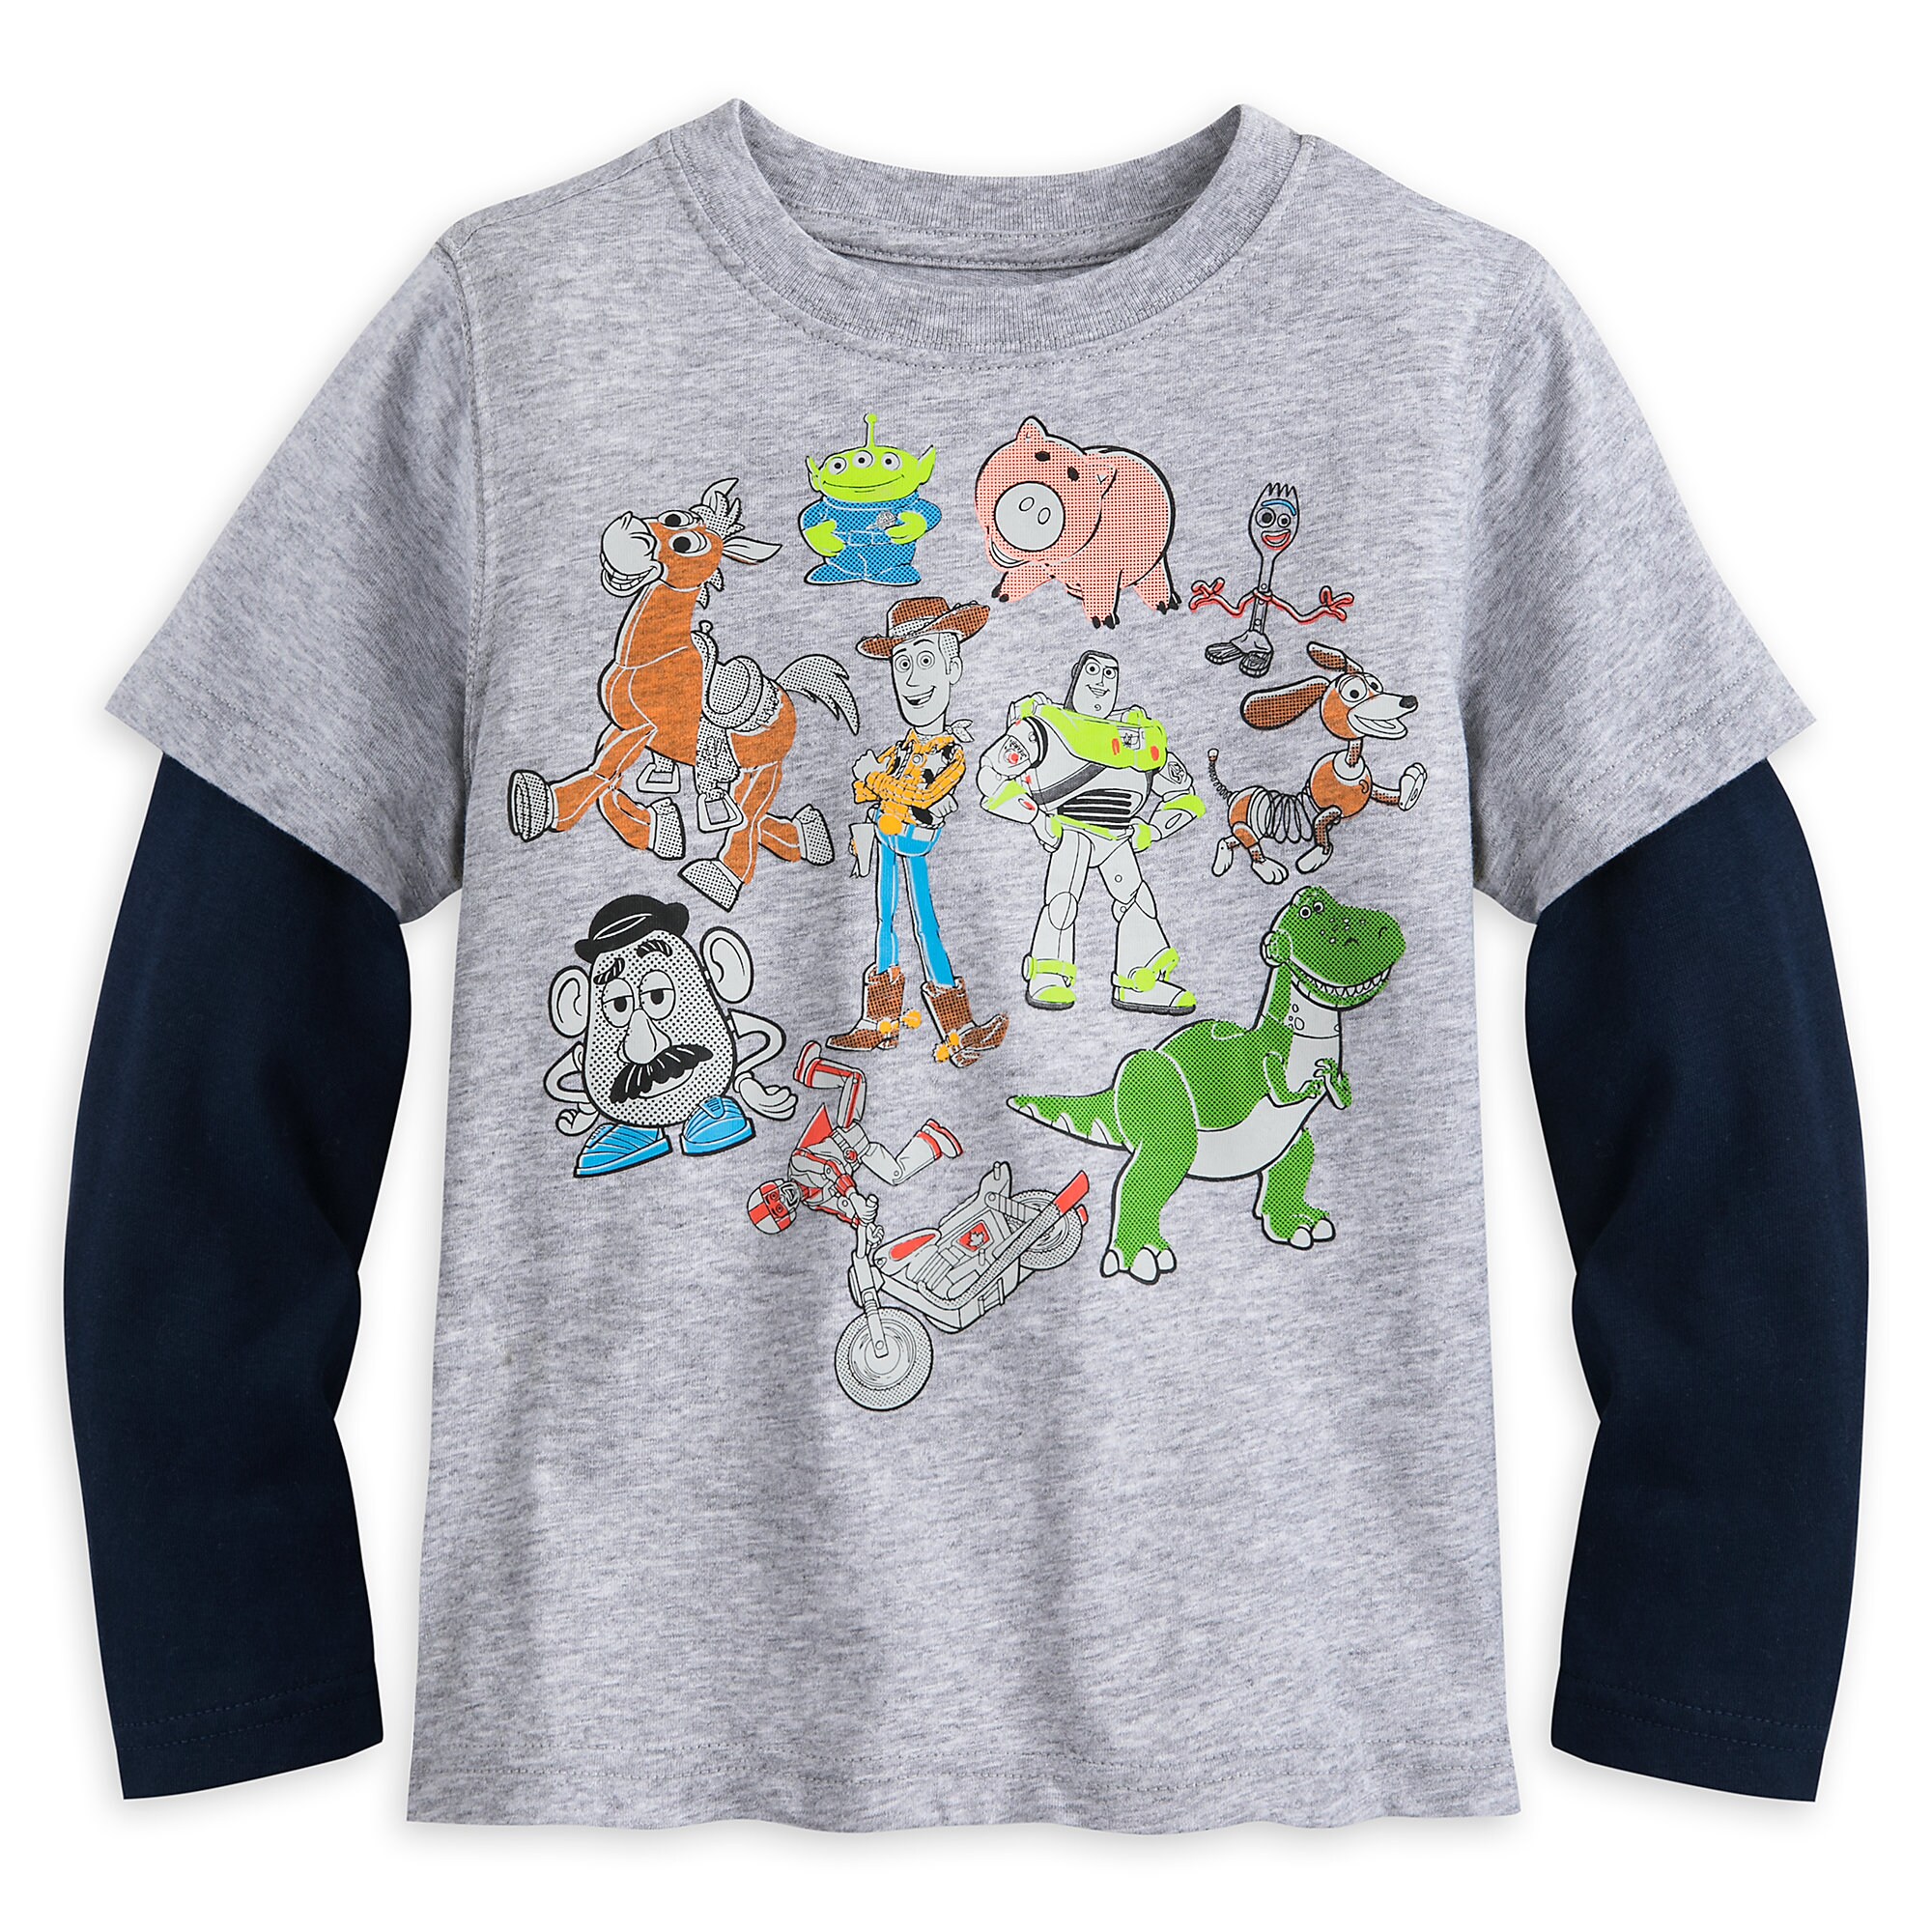 Toy Story 4 Layered T-Shirt for Kids